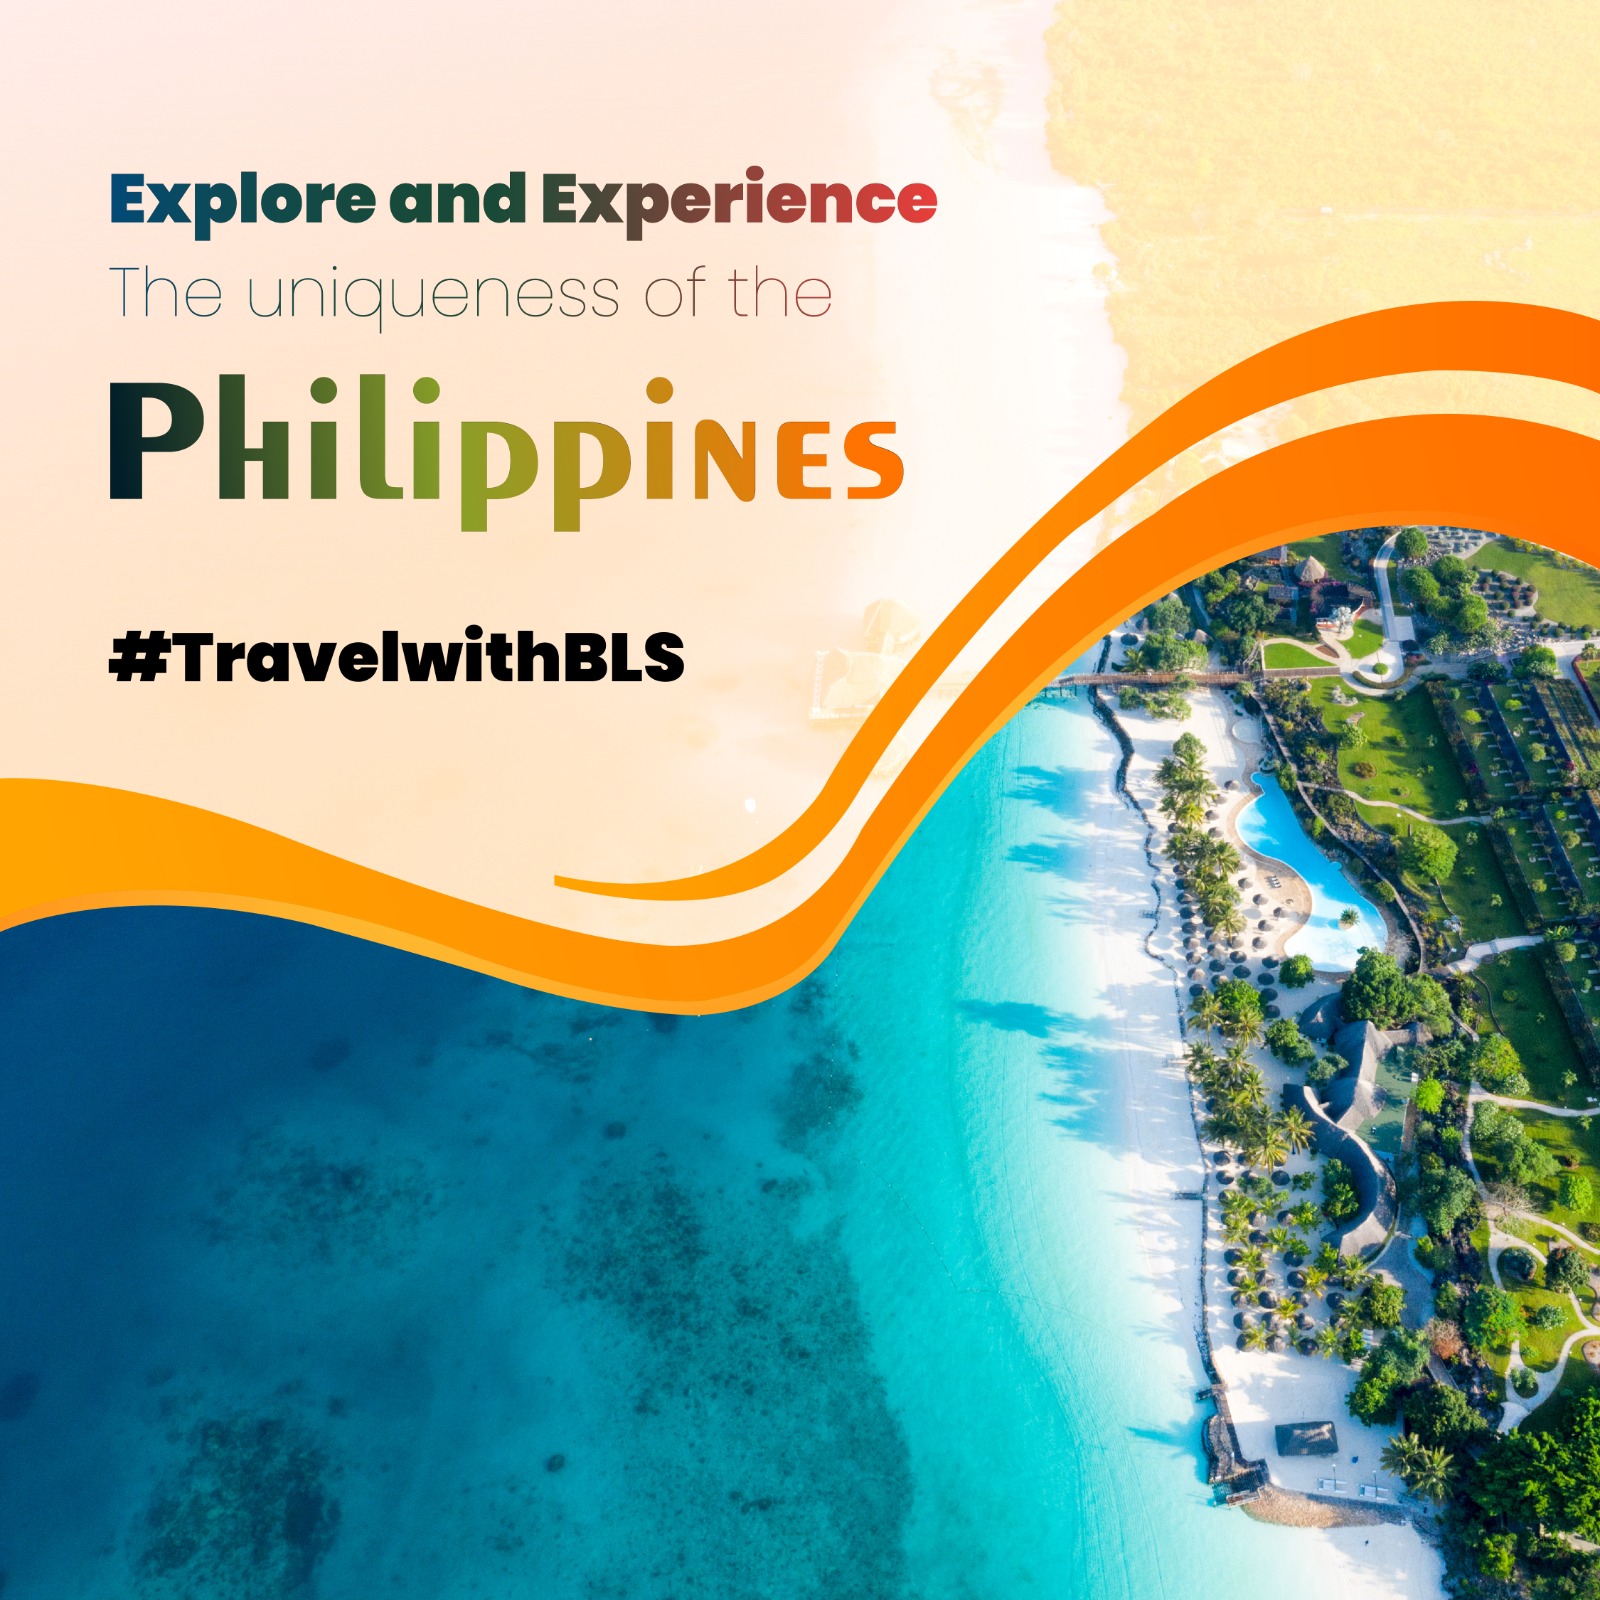 Explore and Experience The Uniqueness of the Philippines